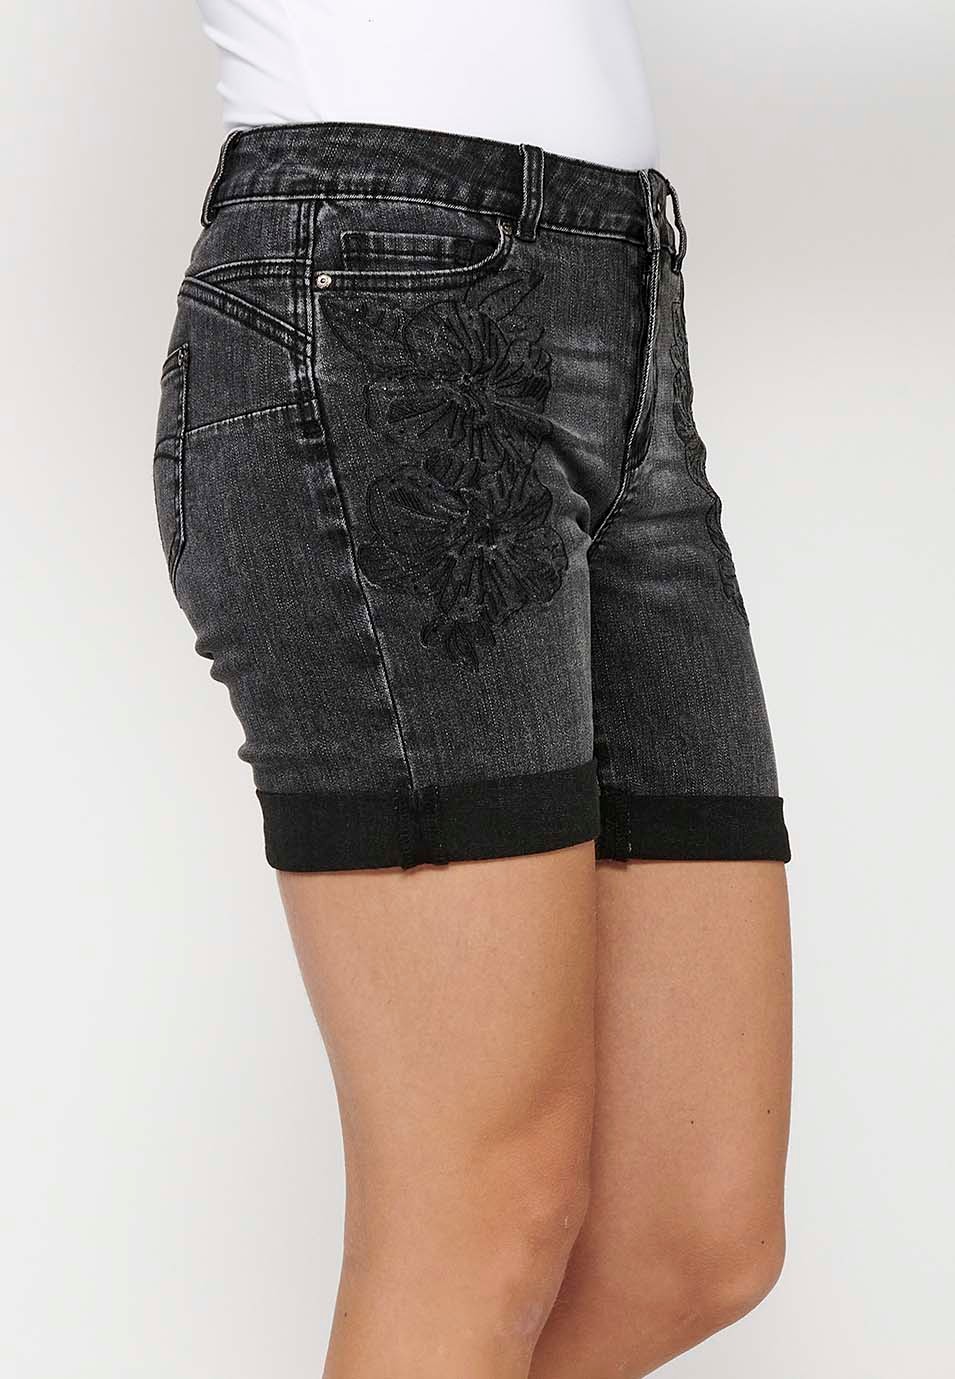 Shorts with a turn-up finish with front closure with zipper and button and floral embroidery in Black for Women 5